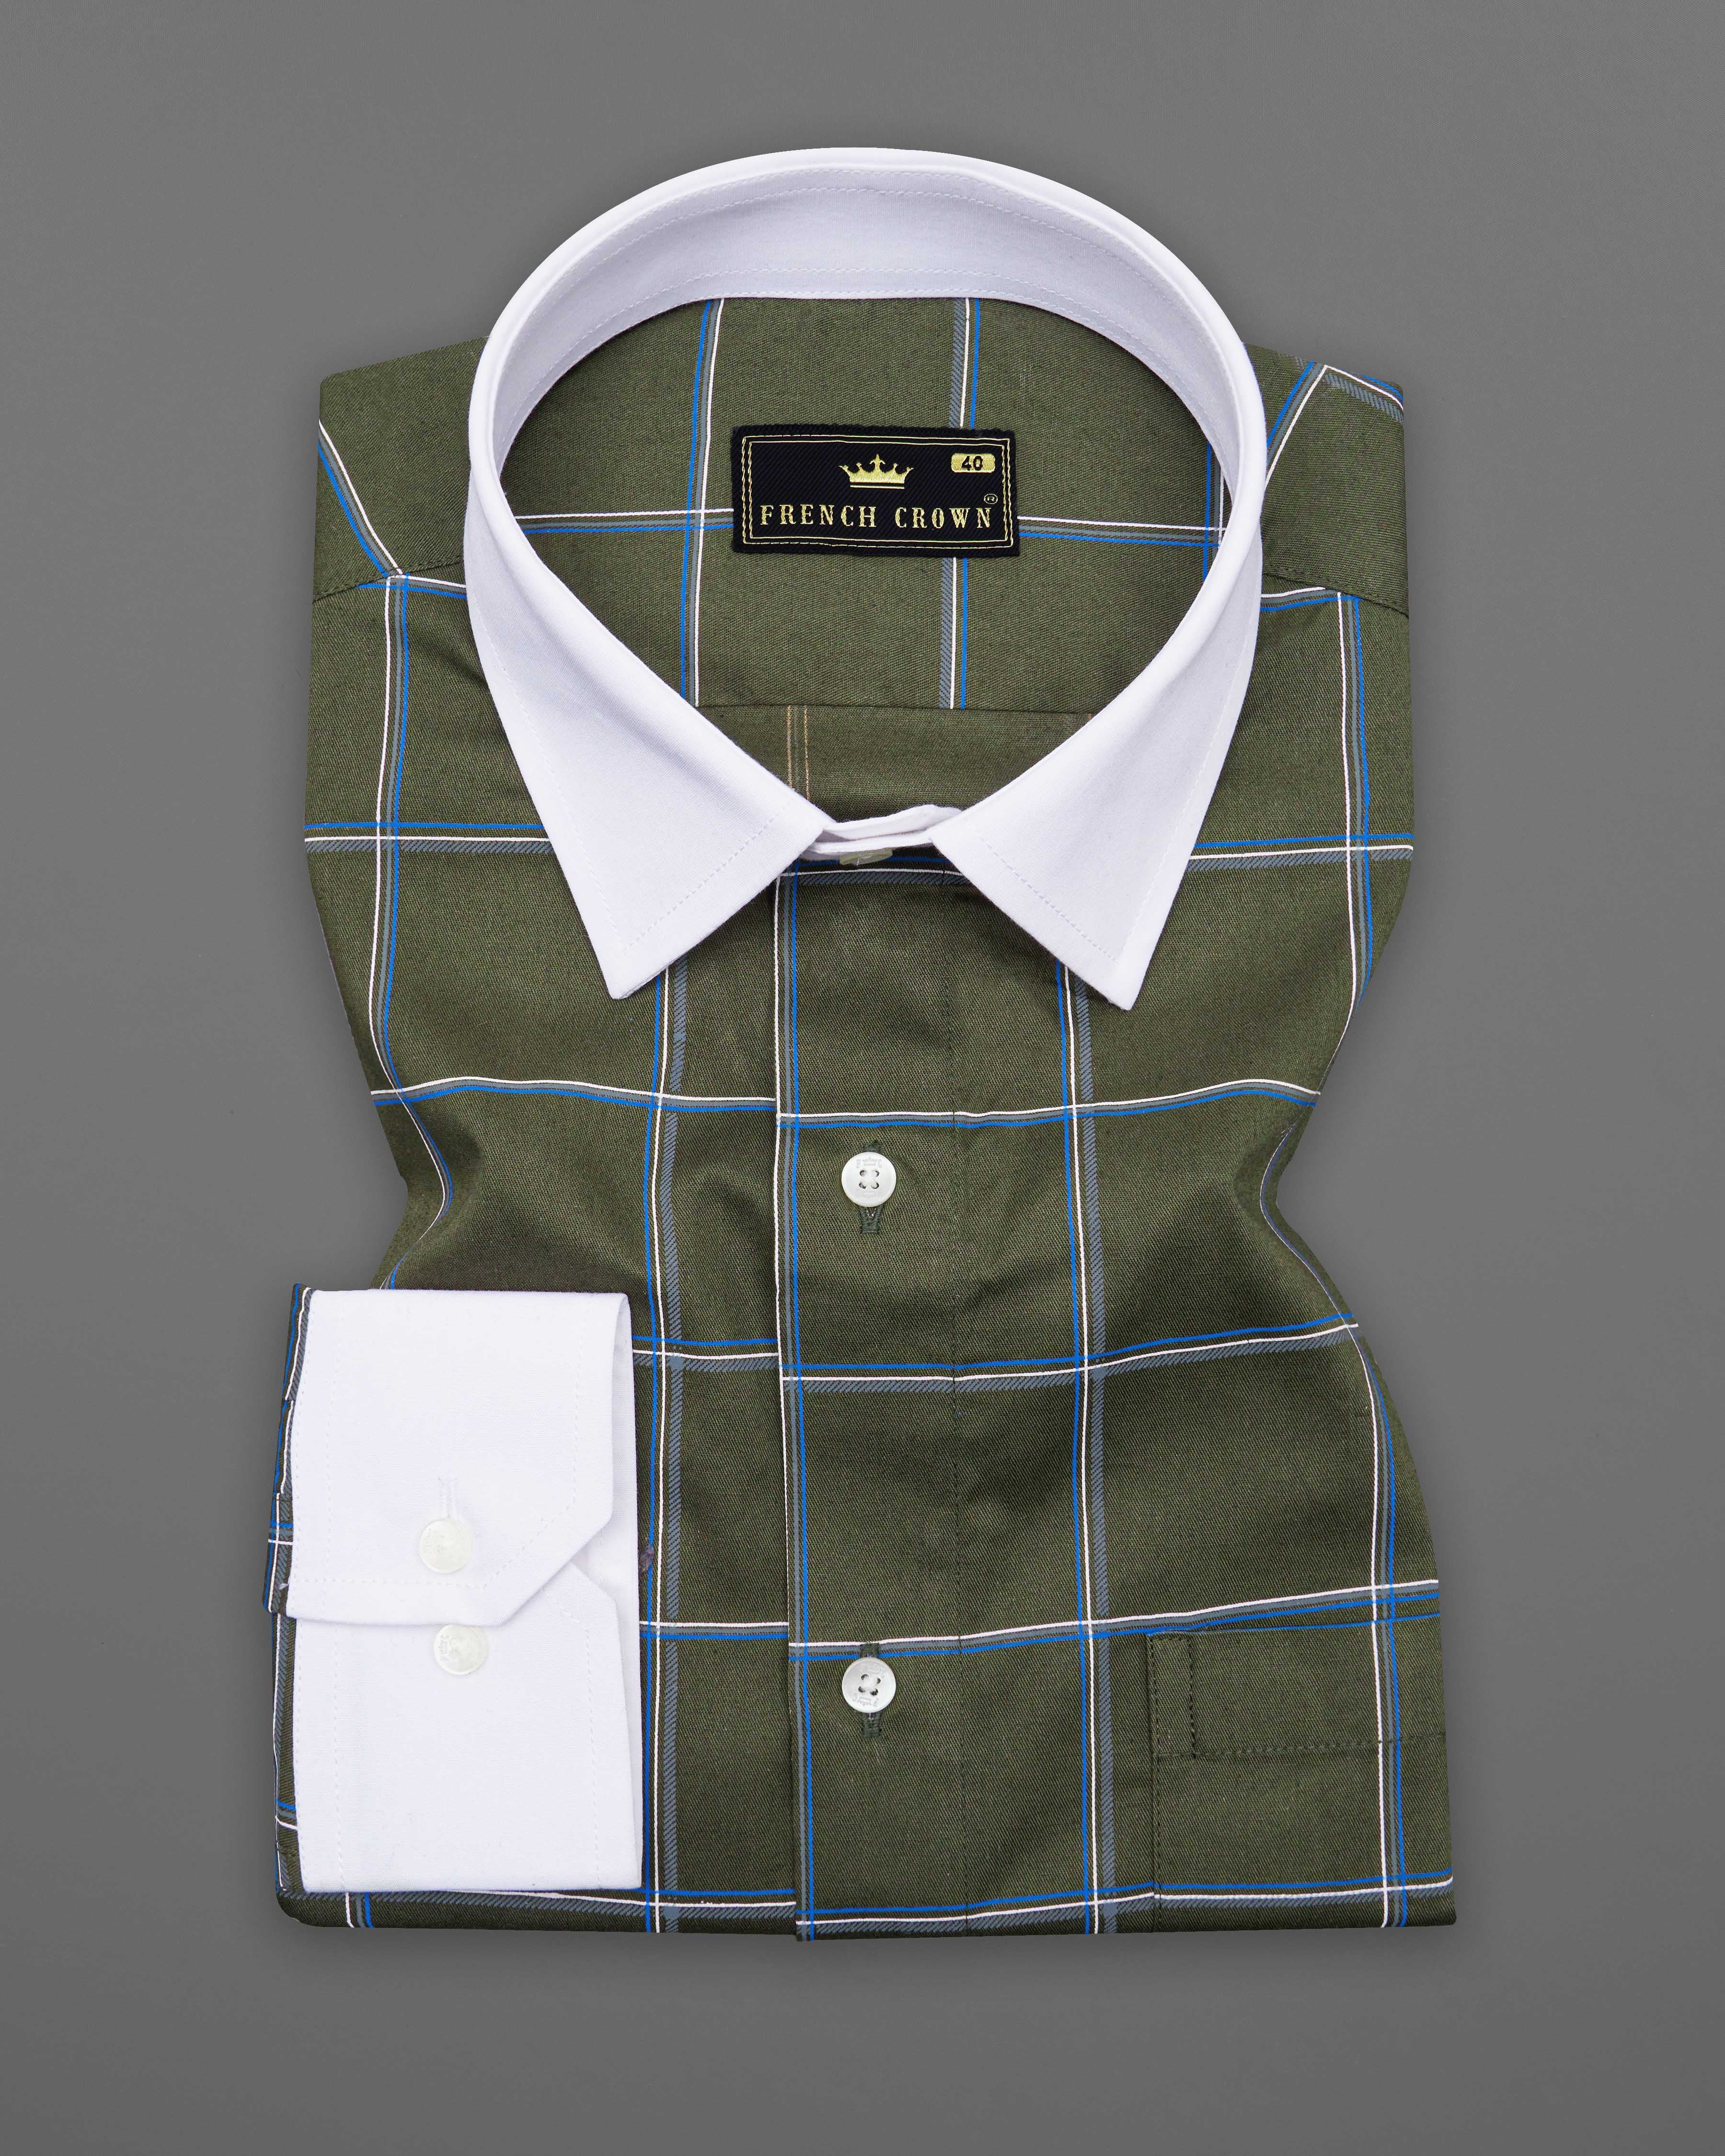 Taupe Green Windowpane with White Collar Royal Oxford Shirt  8716-WCC-38,8716-WCC-H-38,8716-WCC-39,8716-WCC-H-39,8716-WCC-40,8716-WCC-H-40,8716-WCC-42,8716-WCC-H-42,8716-WCC-44,8716-WCC-H-44,8716-WCC-46,8716-WCC-H-46,8716-WCC-48,8716-WCC-H-48,8716-WCC-50,8716-WCC-H-50,8716-WCC-52,8716-WCC-H-52